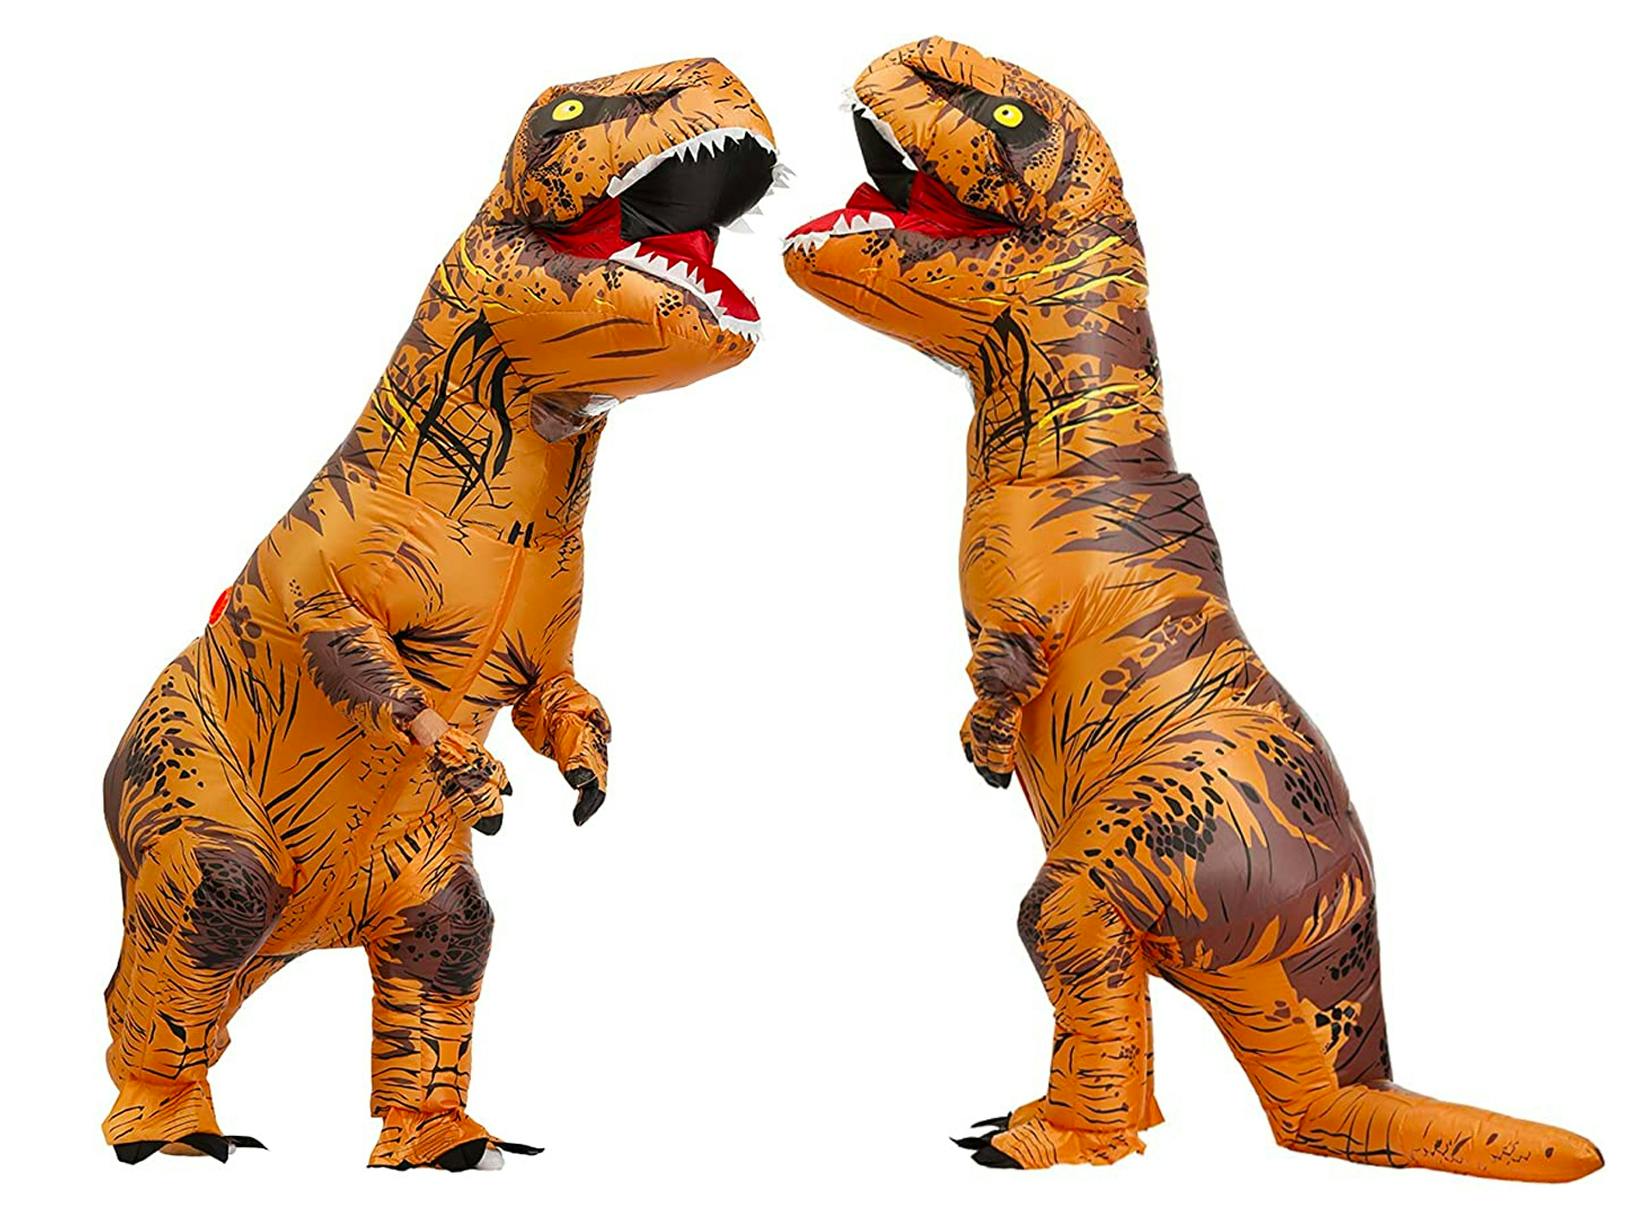 A person wearing an inflatable dinosaur costume showing two sides on a white background.